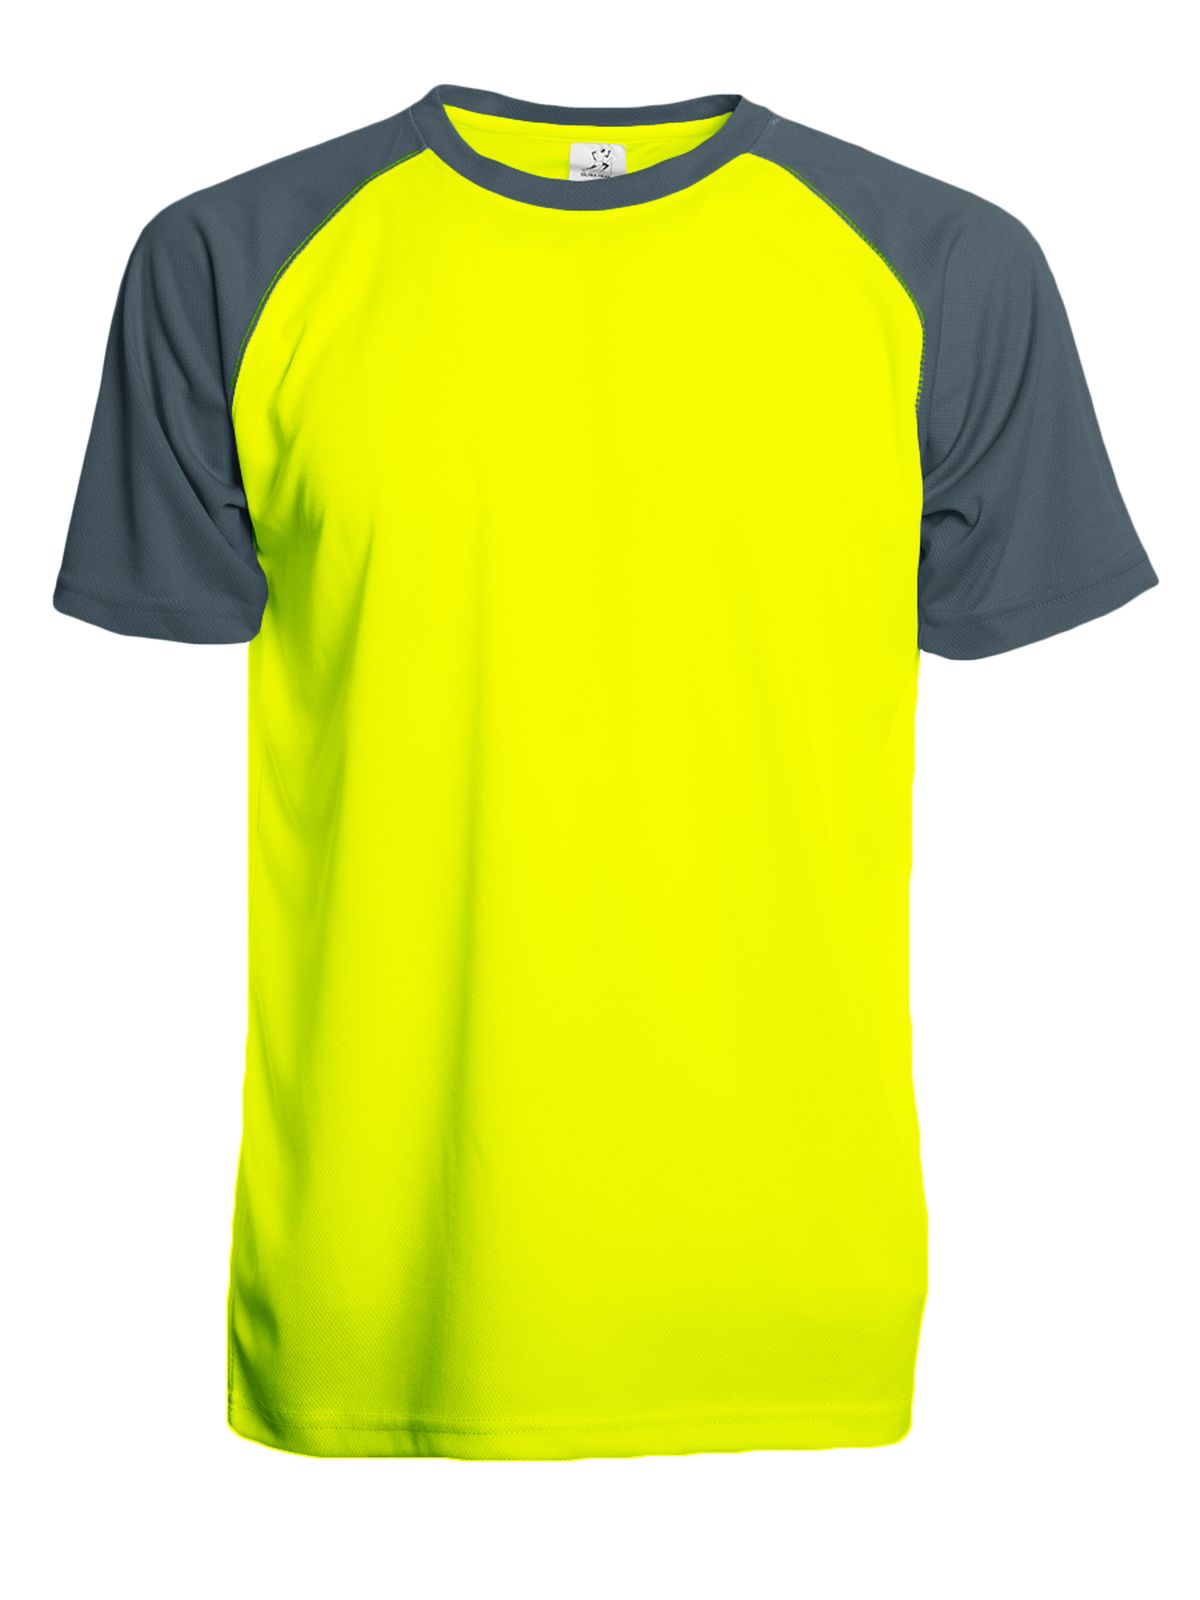 run-t-ultra-trail-yellow-fluo-antracite.webp